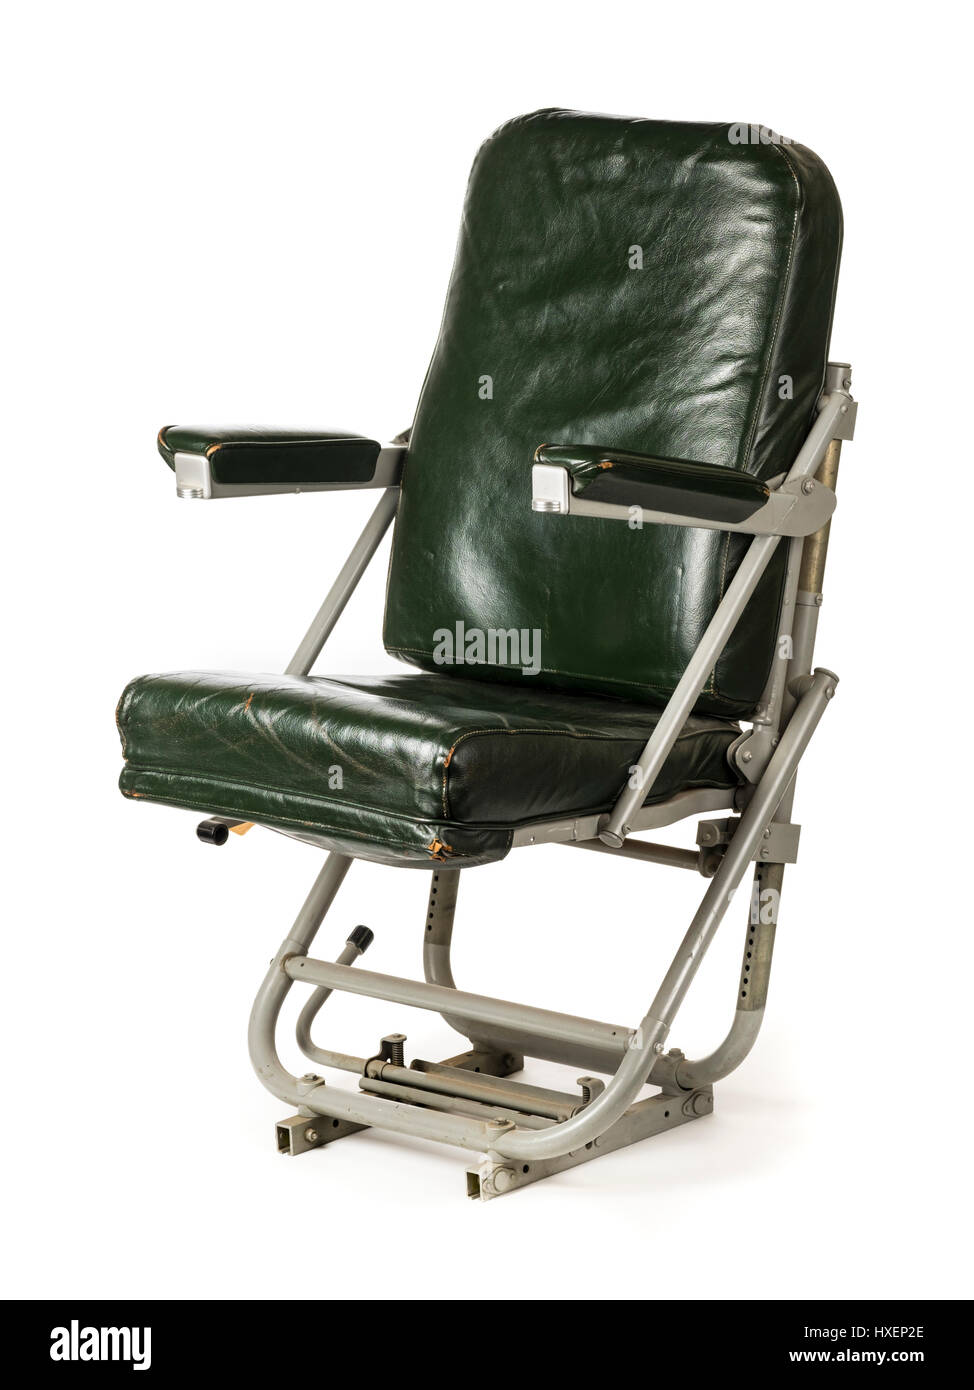 WW2 Royal Air Force DC-3 Dakota aircraft spring-loaded co-pilot seat with green leather upholstery. Manufactured by the Dennison MFG Co. Stock Photo